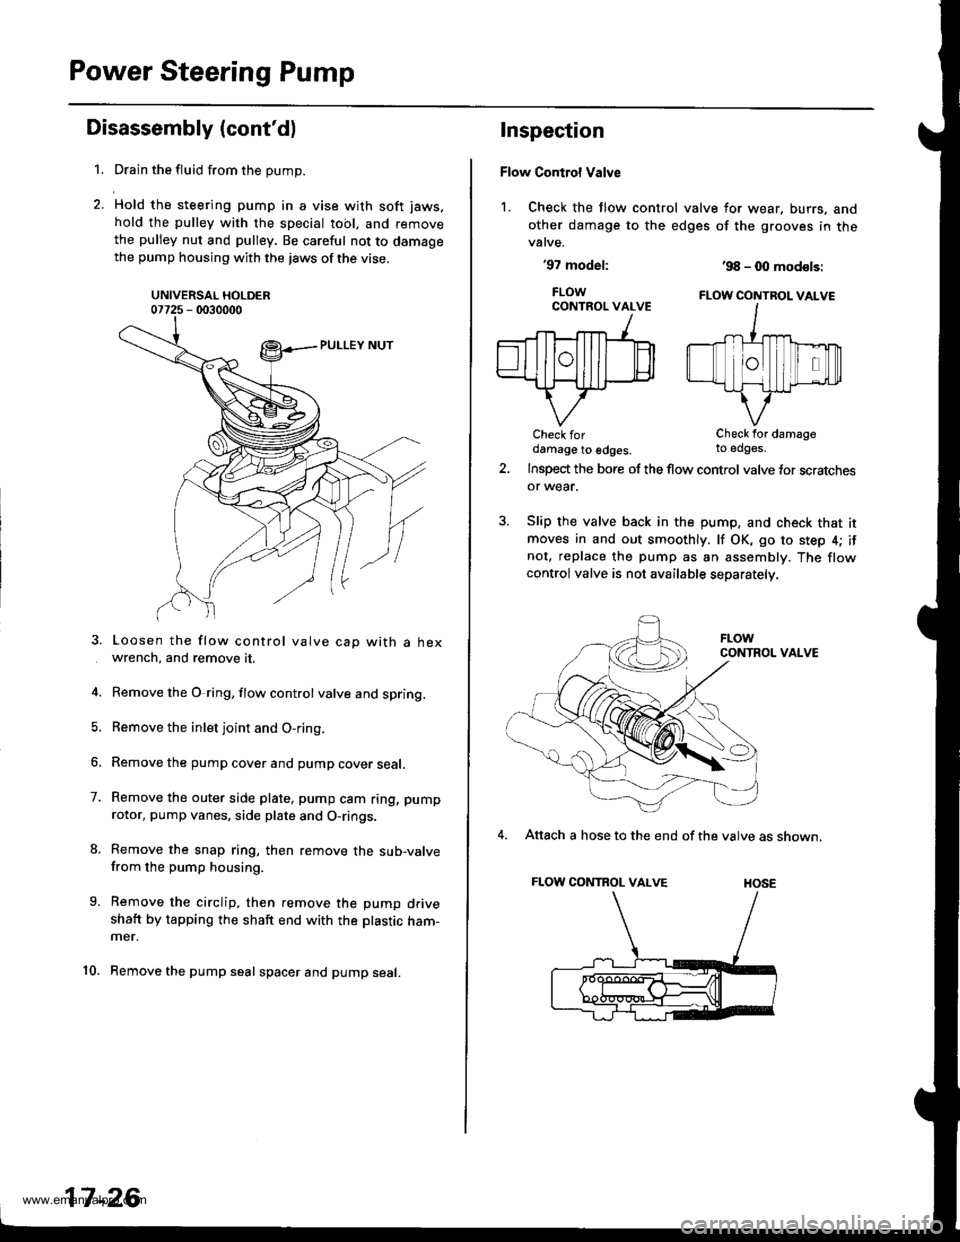 HONDA CR-V 1997 RD1-RD3 / 1.G Workshop Manual 
Power Steering Pump
Disassembly (contdl
1.
7.
9.
10.
Drain the fluid from the pump.
Hold the steering pump in a vise with soft jaws.
hold the pulley with the special tool, and remove
the pulley nut 